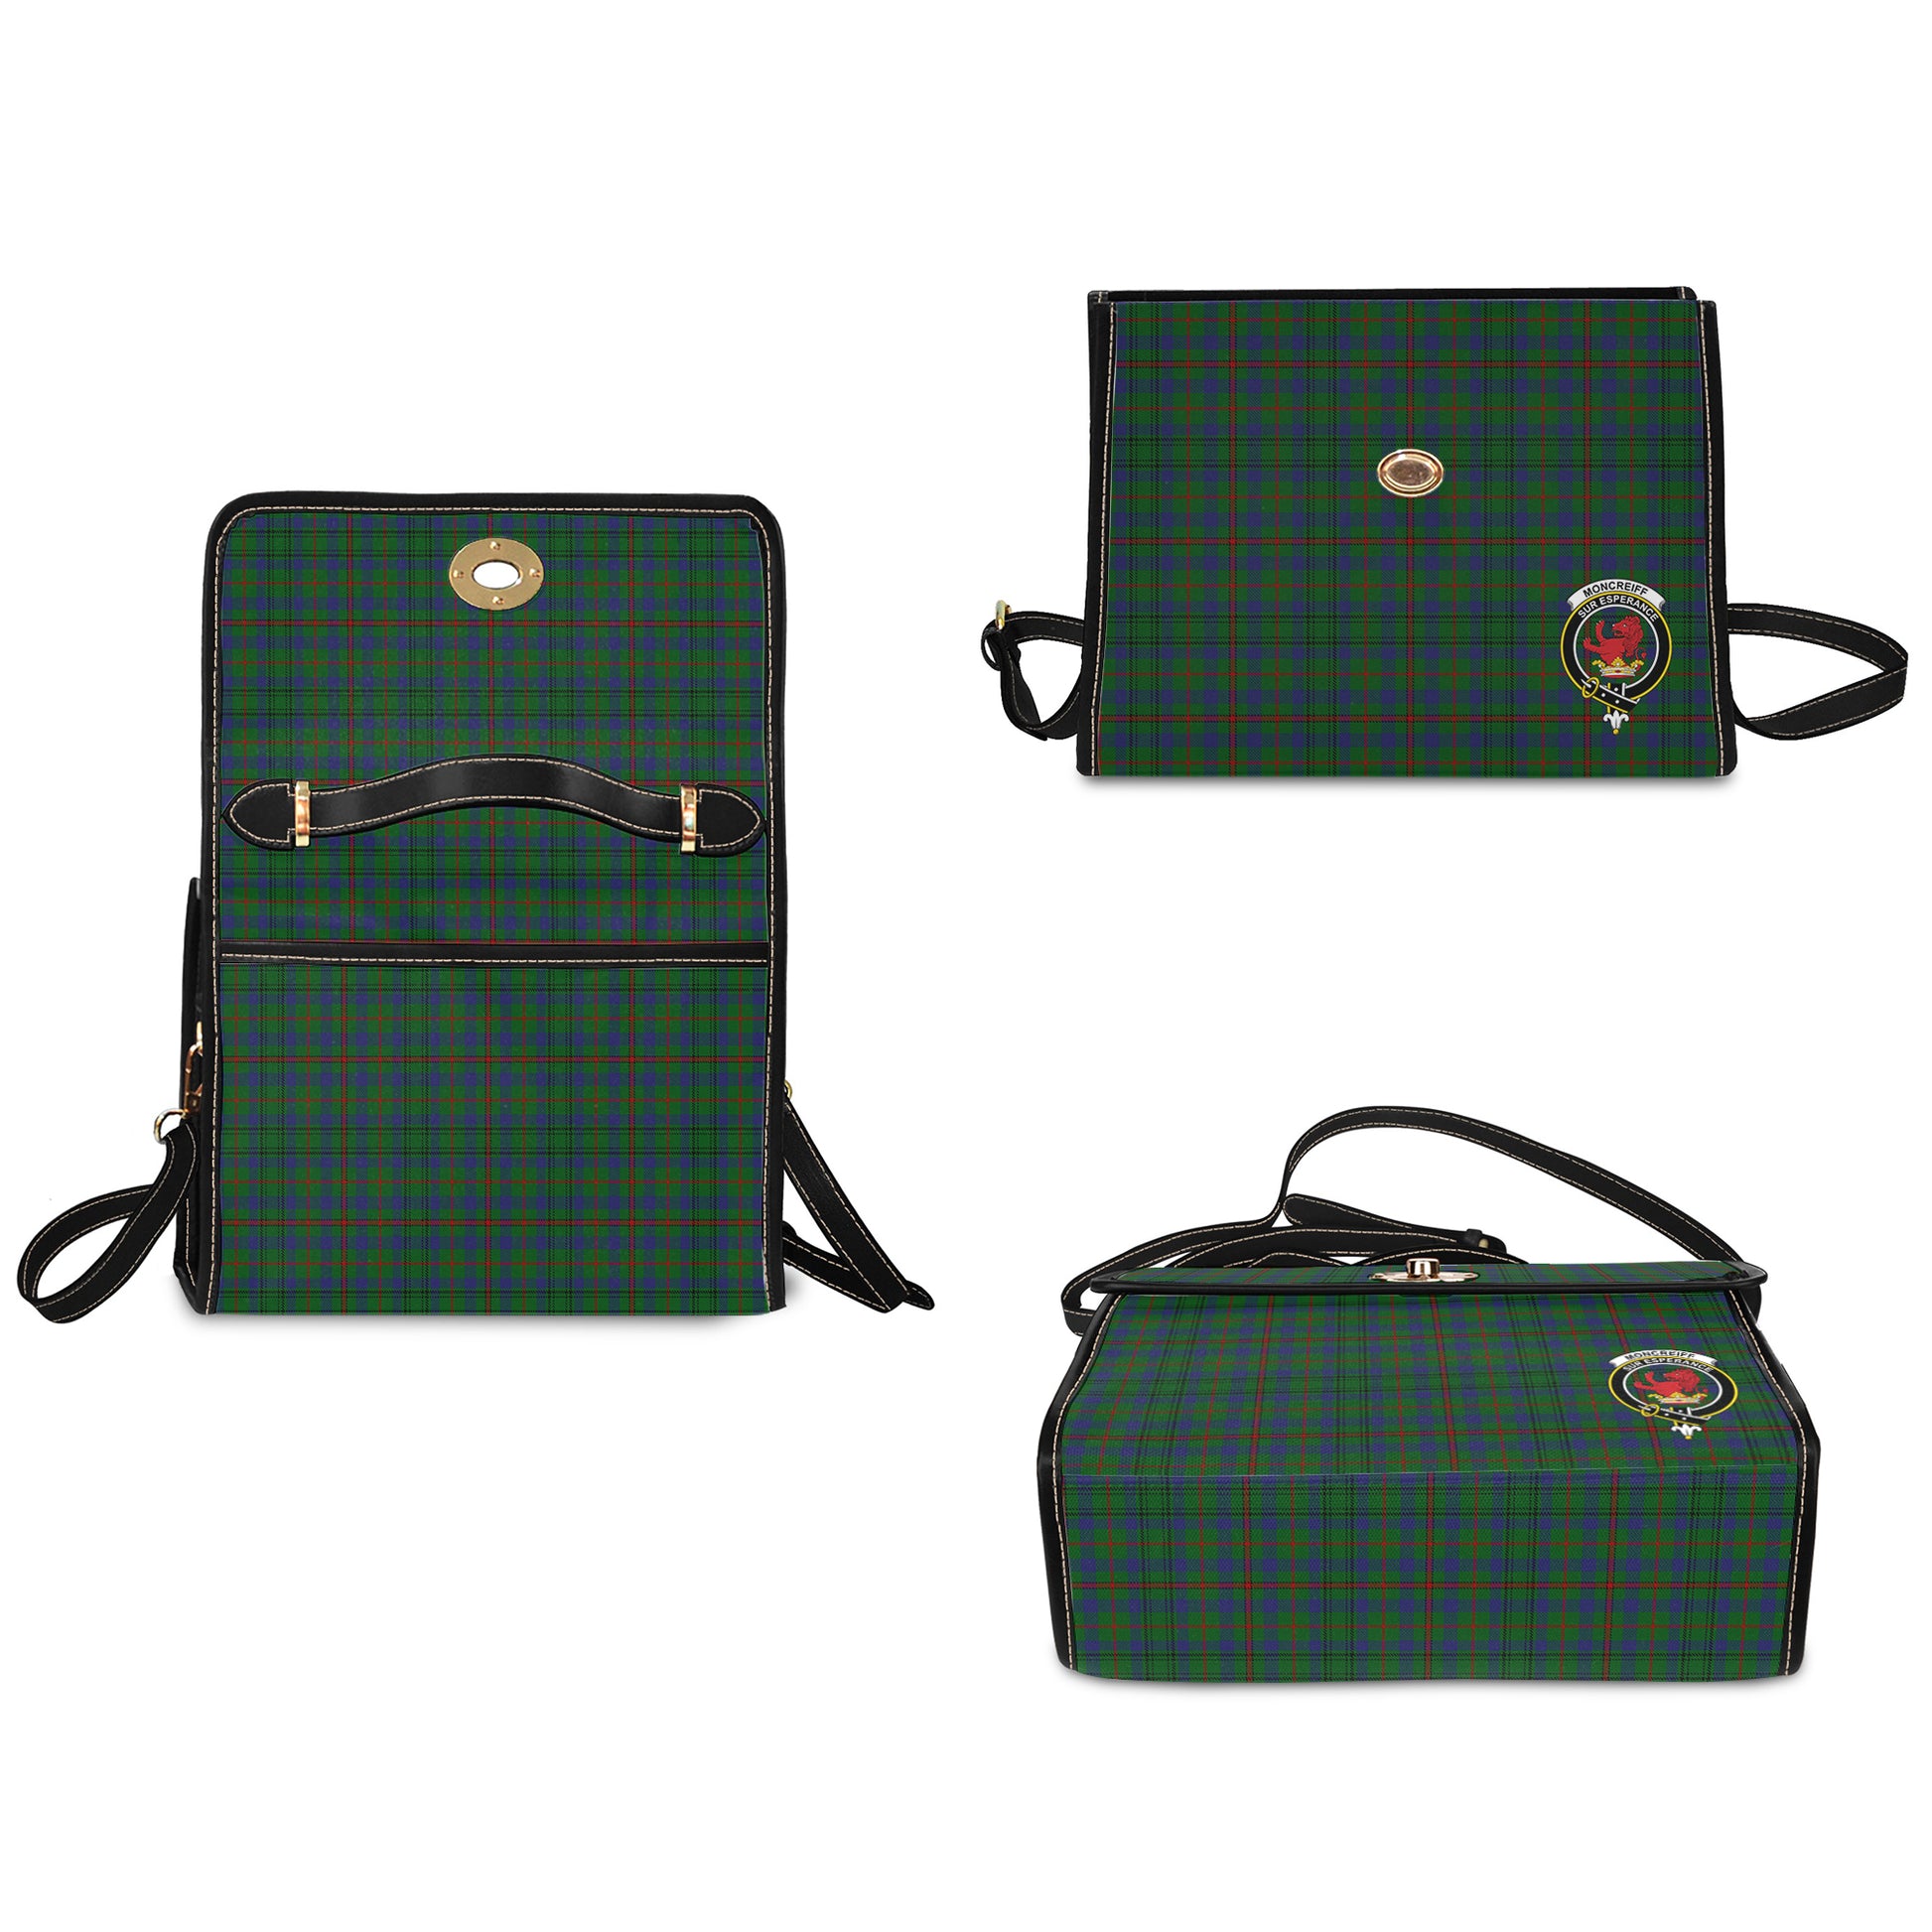 moncrieff-of-atholl-tartan-leather-strap-waterproof-canvas-bag-with-family-crest